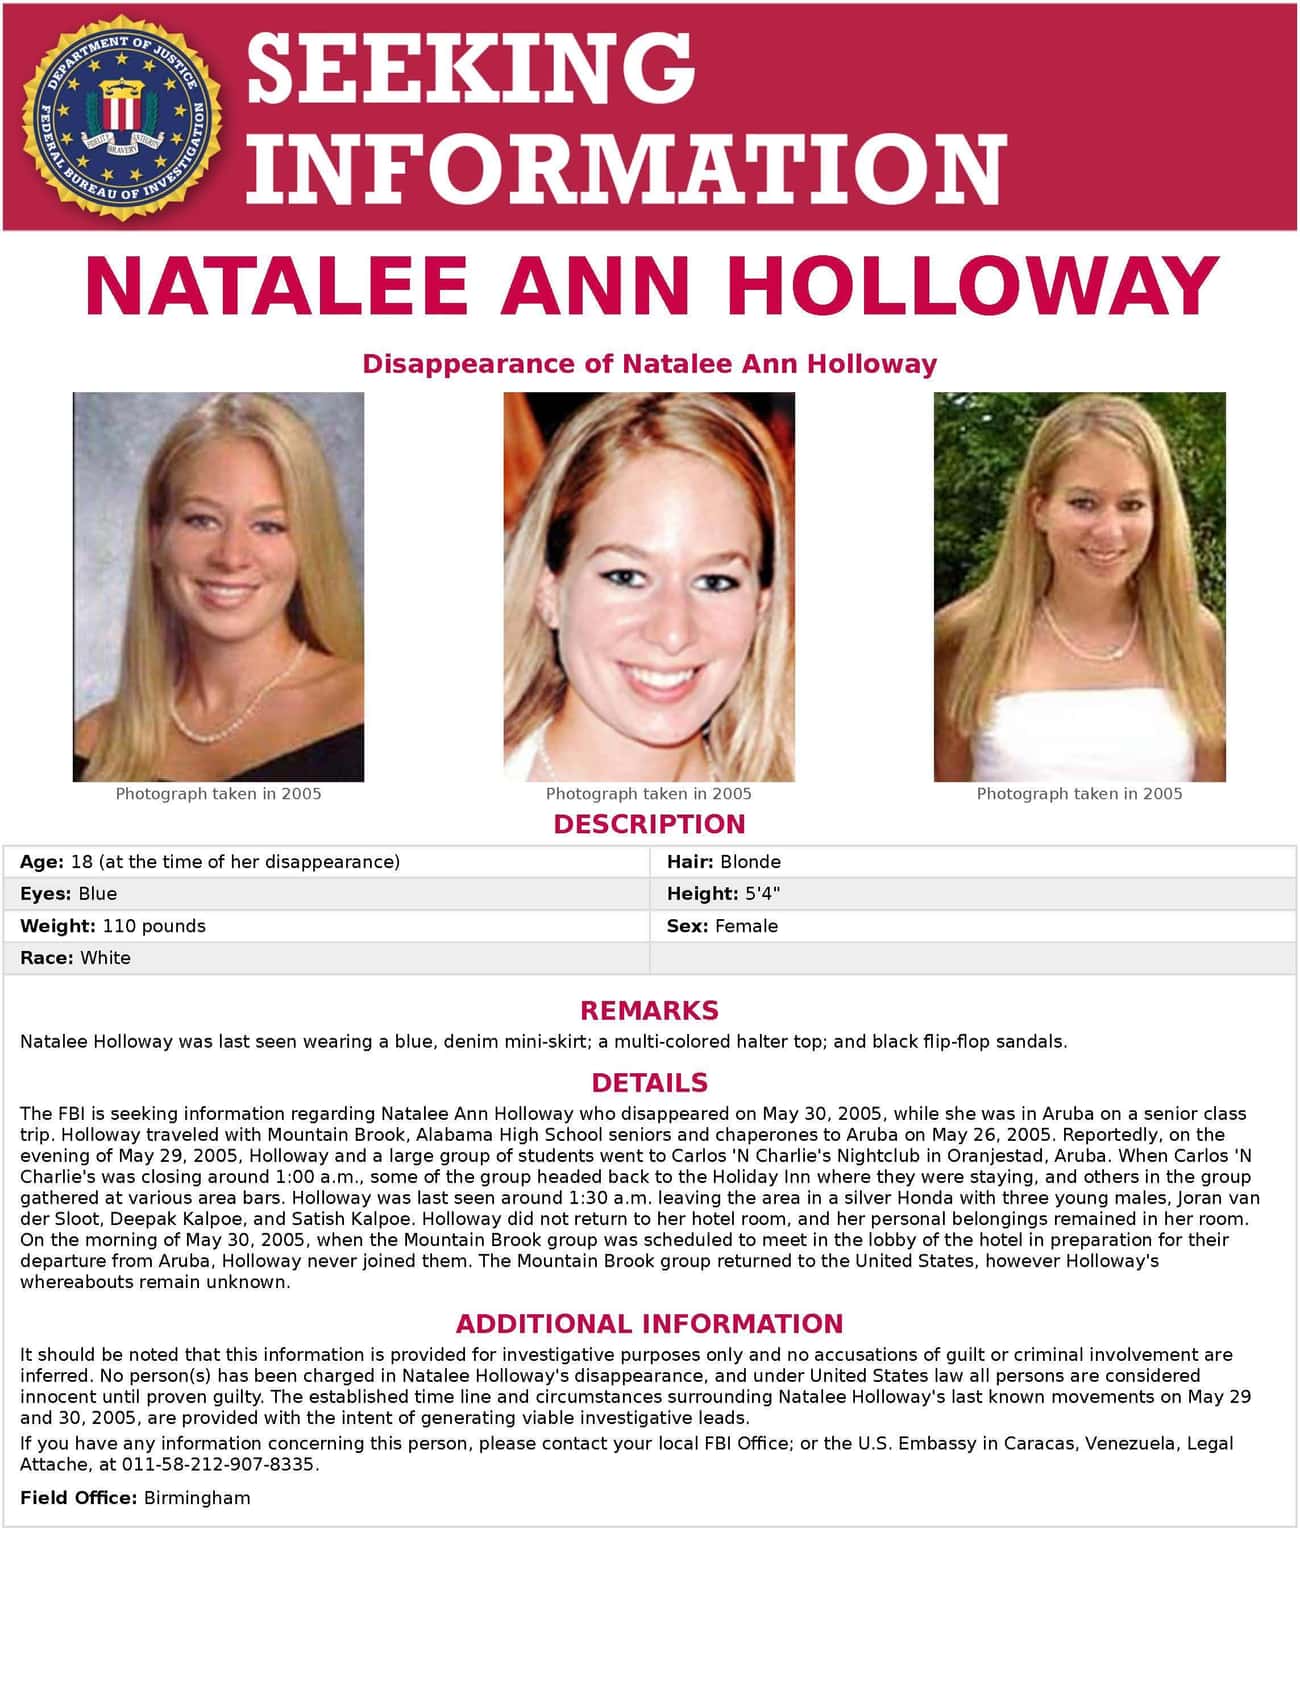 Natalee Holloway Disappeared On A Graduation Trip To Aruba In 2005